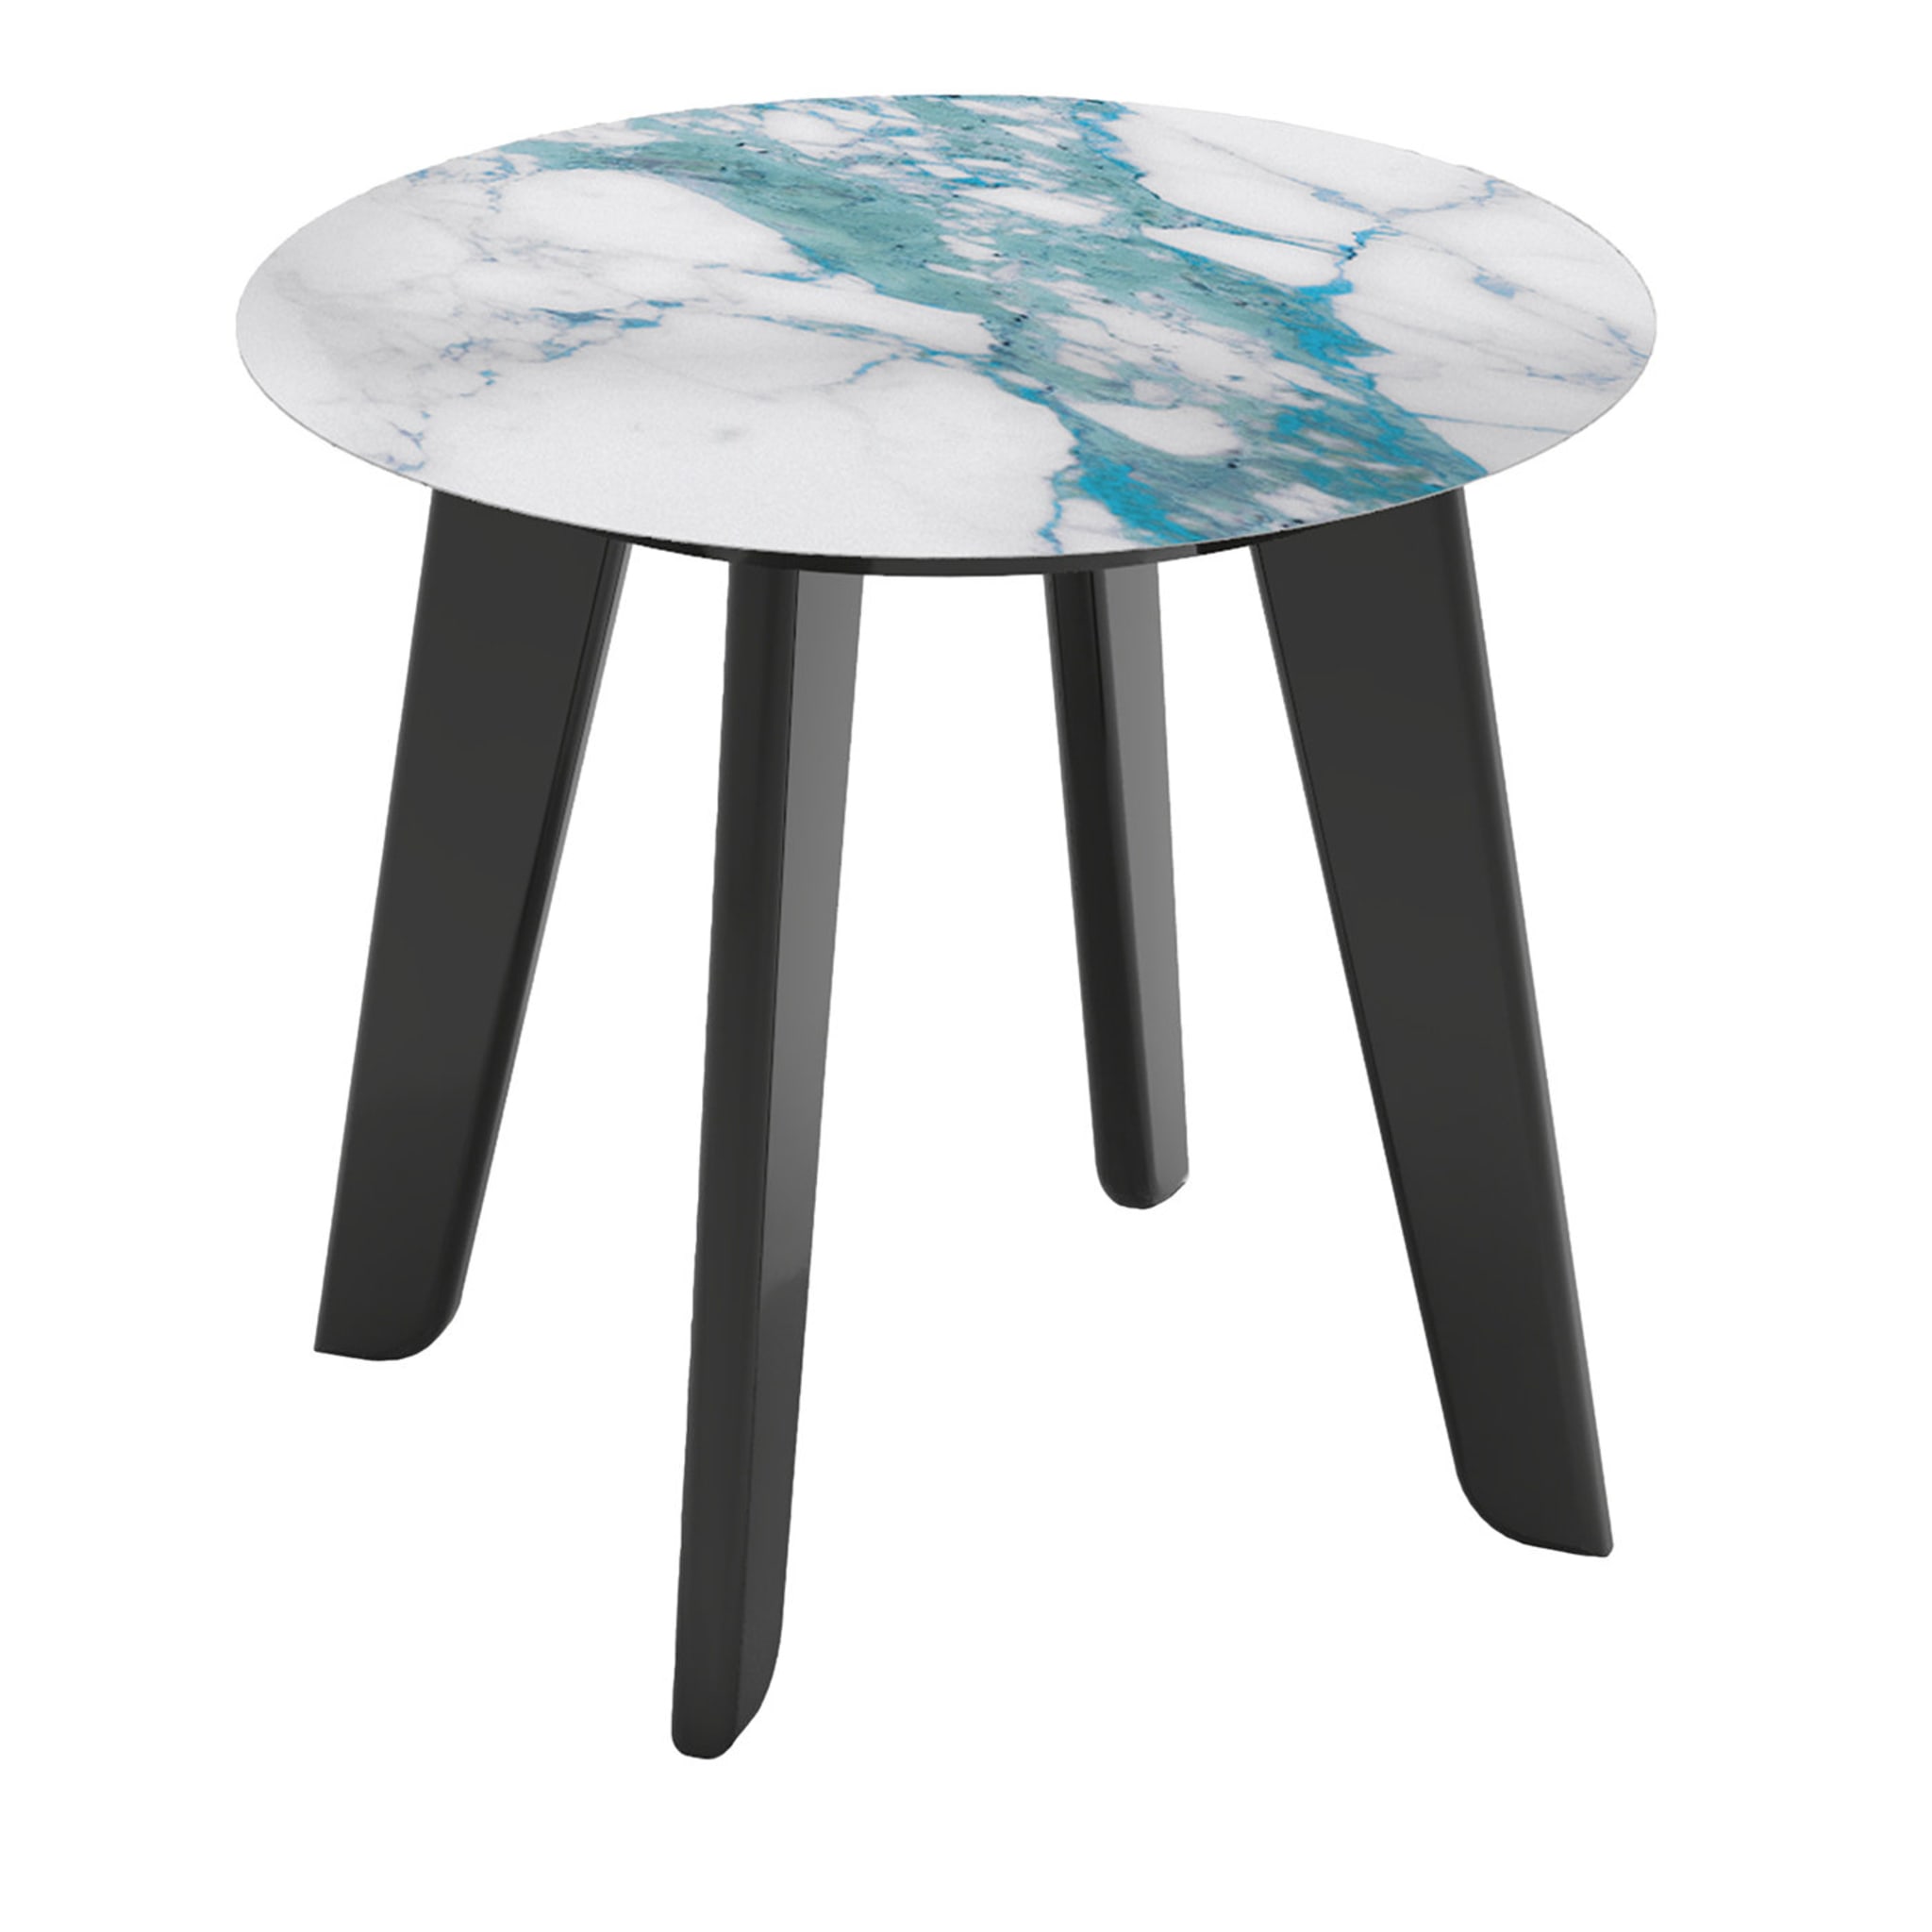 Owen Low Round Side Table with White and Turquoise Top - Main view